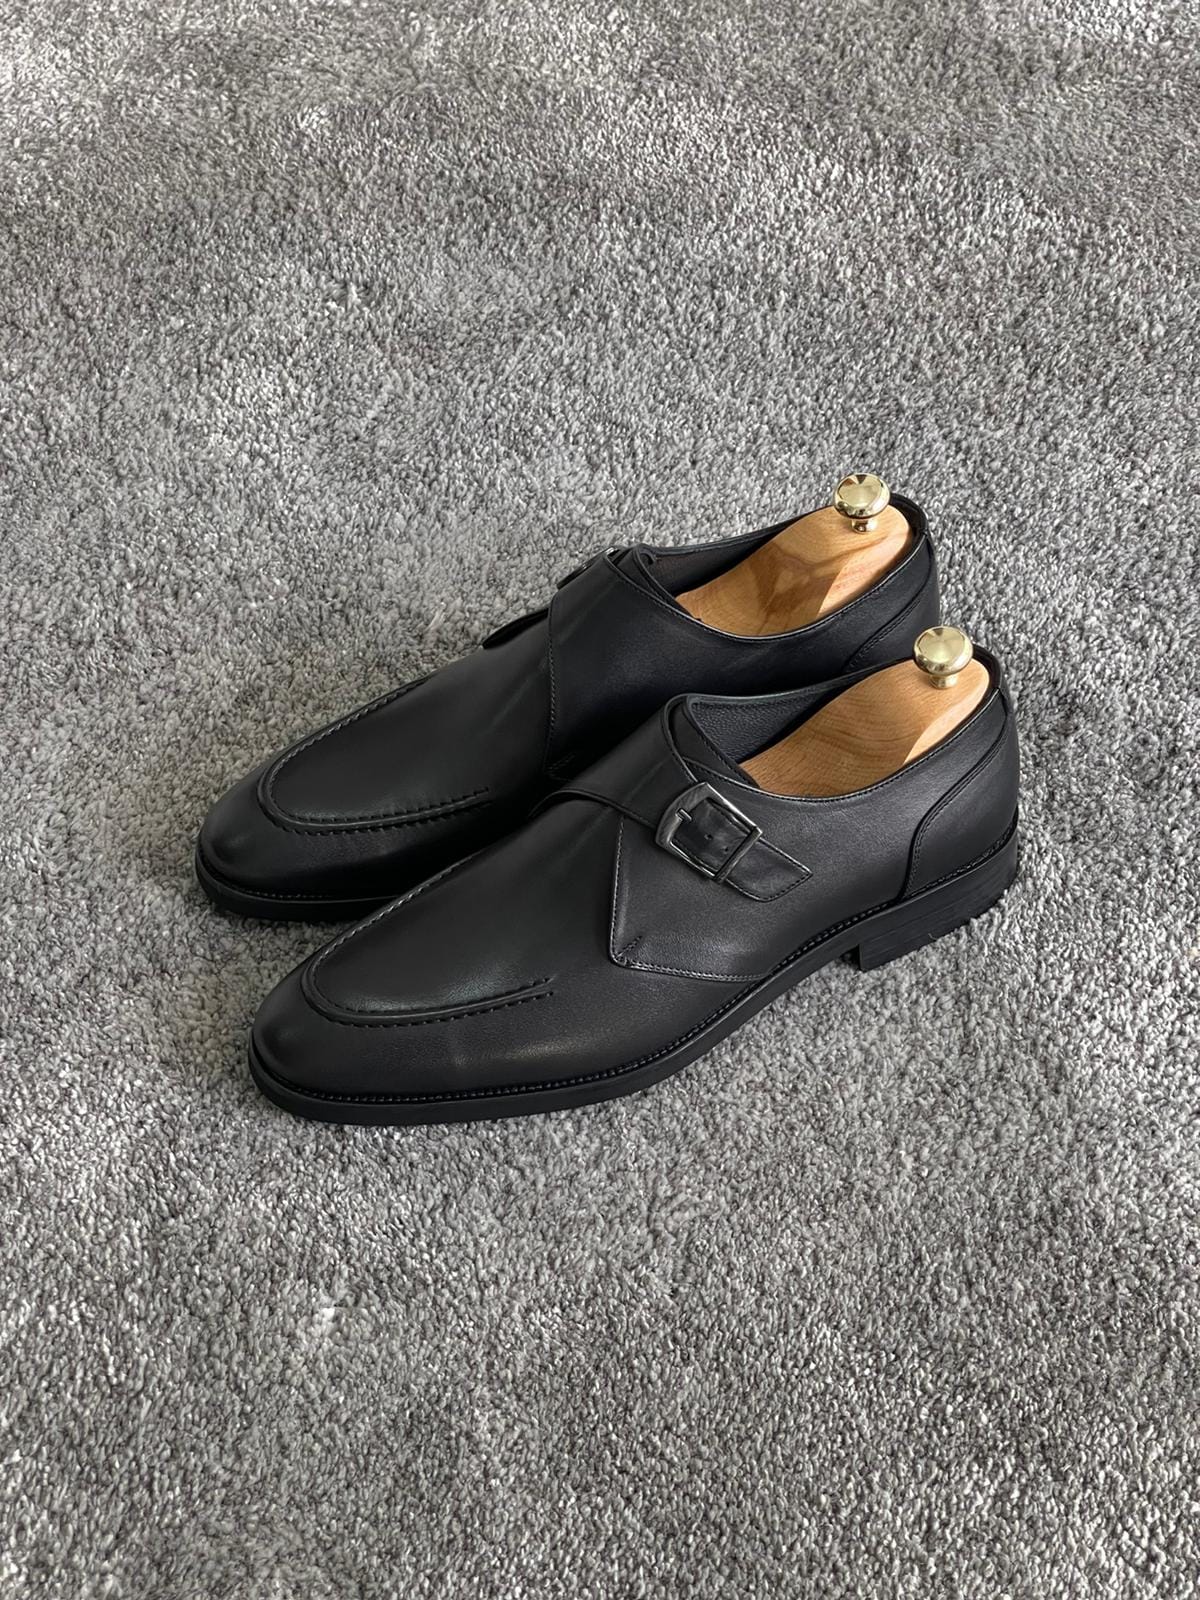 
                  
                    Buckle Leather Classic Black Shoes - OUTFITLIFT
                  
                